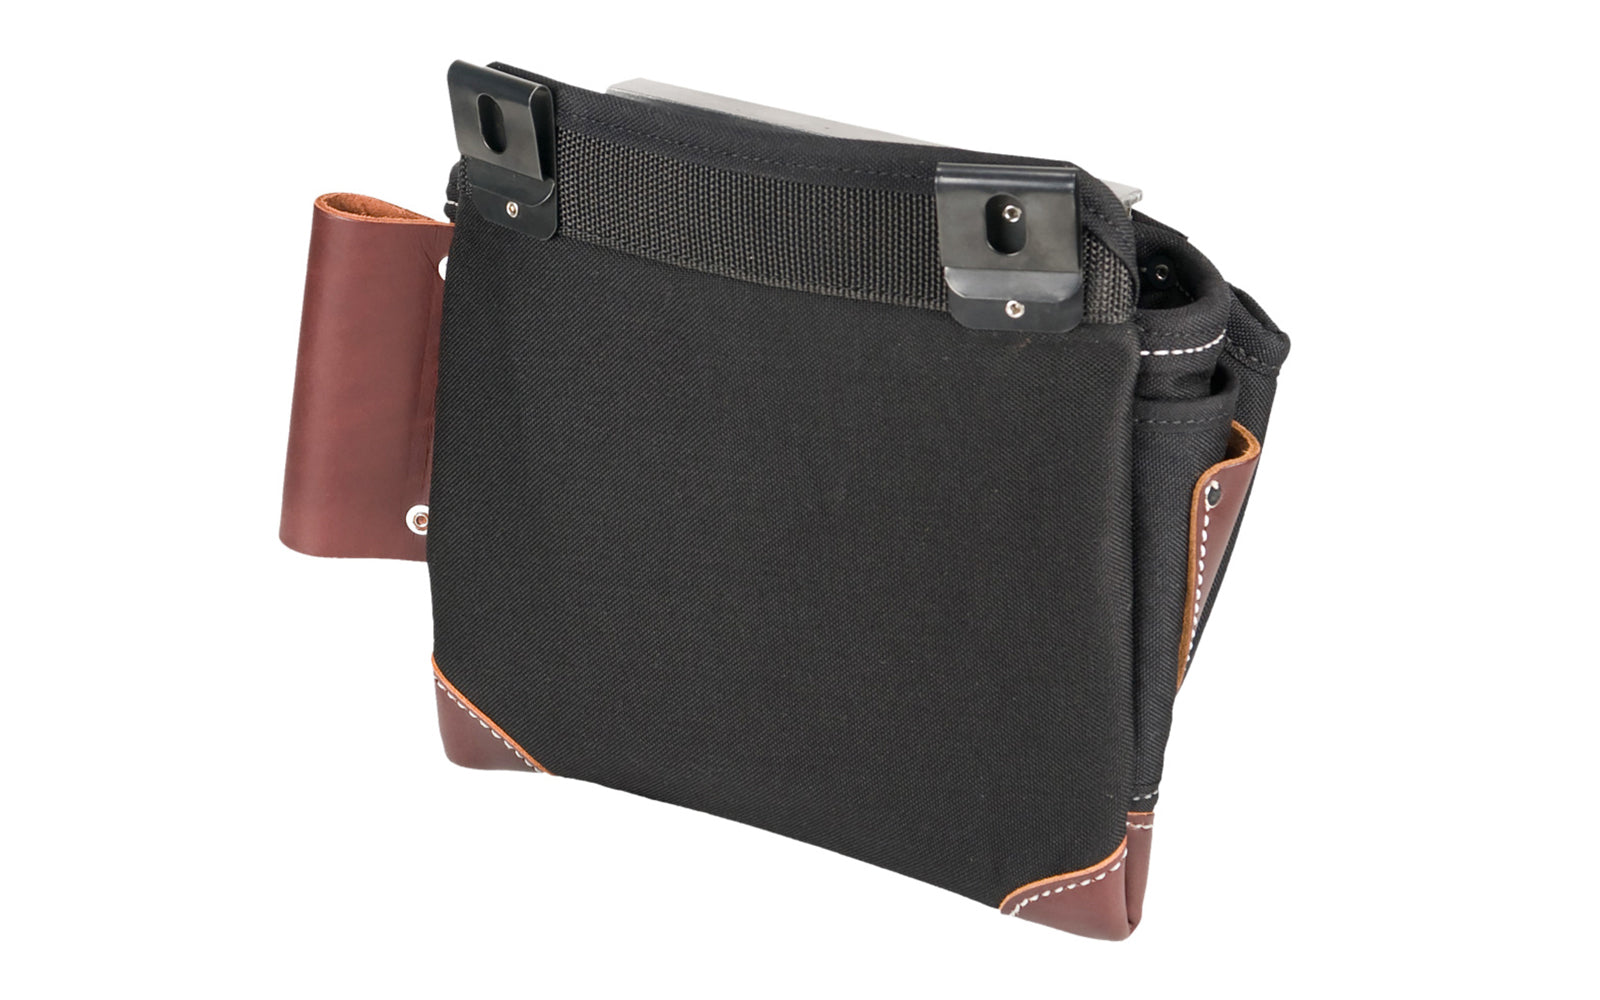 Occidental Leather Builders' Vest Clip On Fastener Bag ~ Model 8564 - Occidental Leather clip-on tool bag features 3-pouch design for tools & fasteners, plus a heavy duty hammer loop. Designed to fit the Builders' Vest No. 2535. Made of industrial nylon material & genuine leather. 759244275407